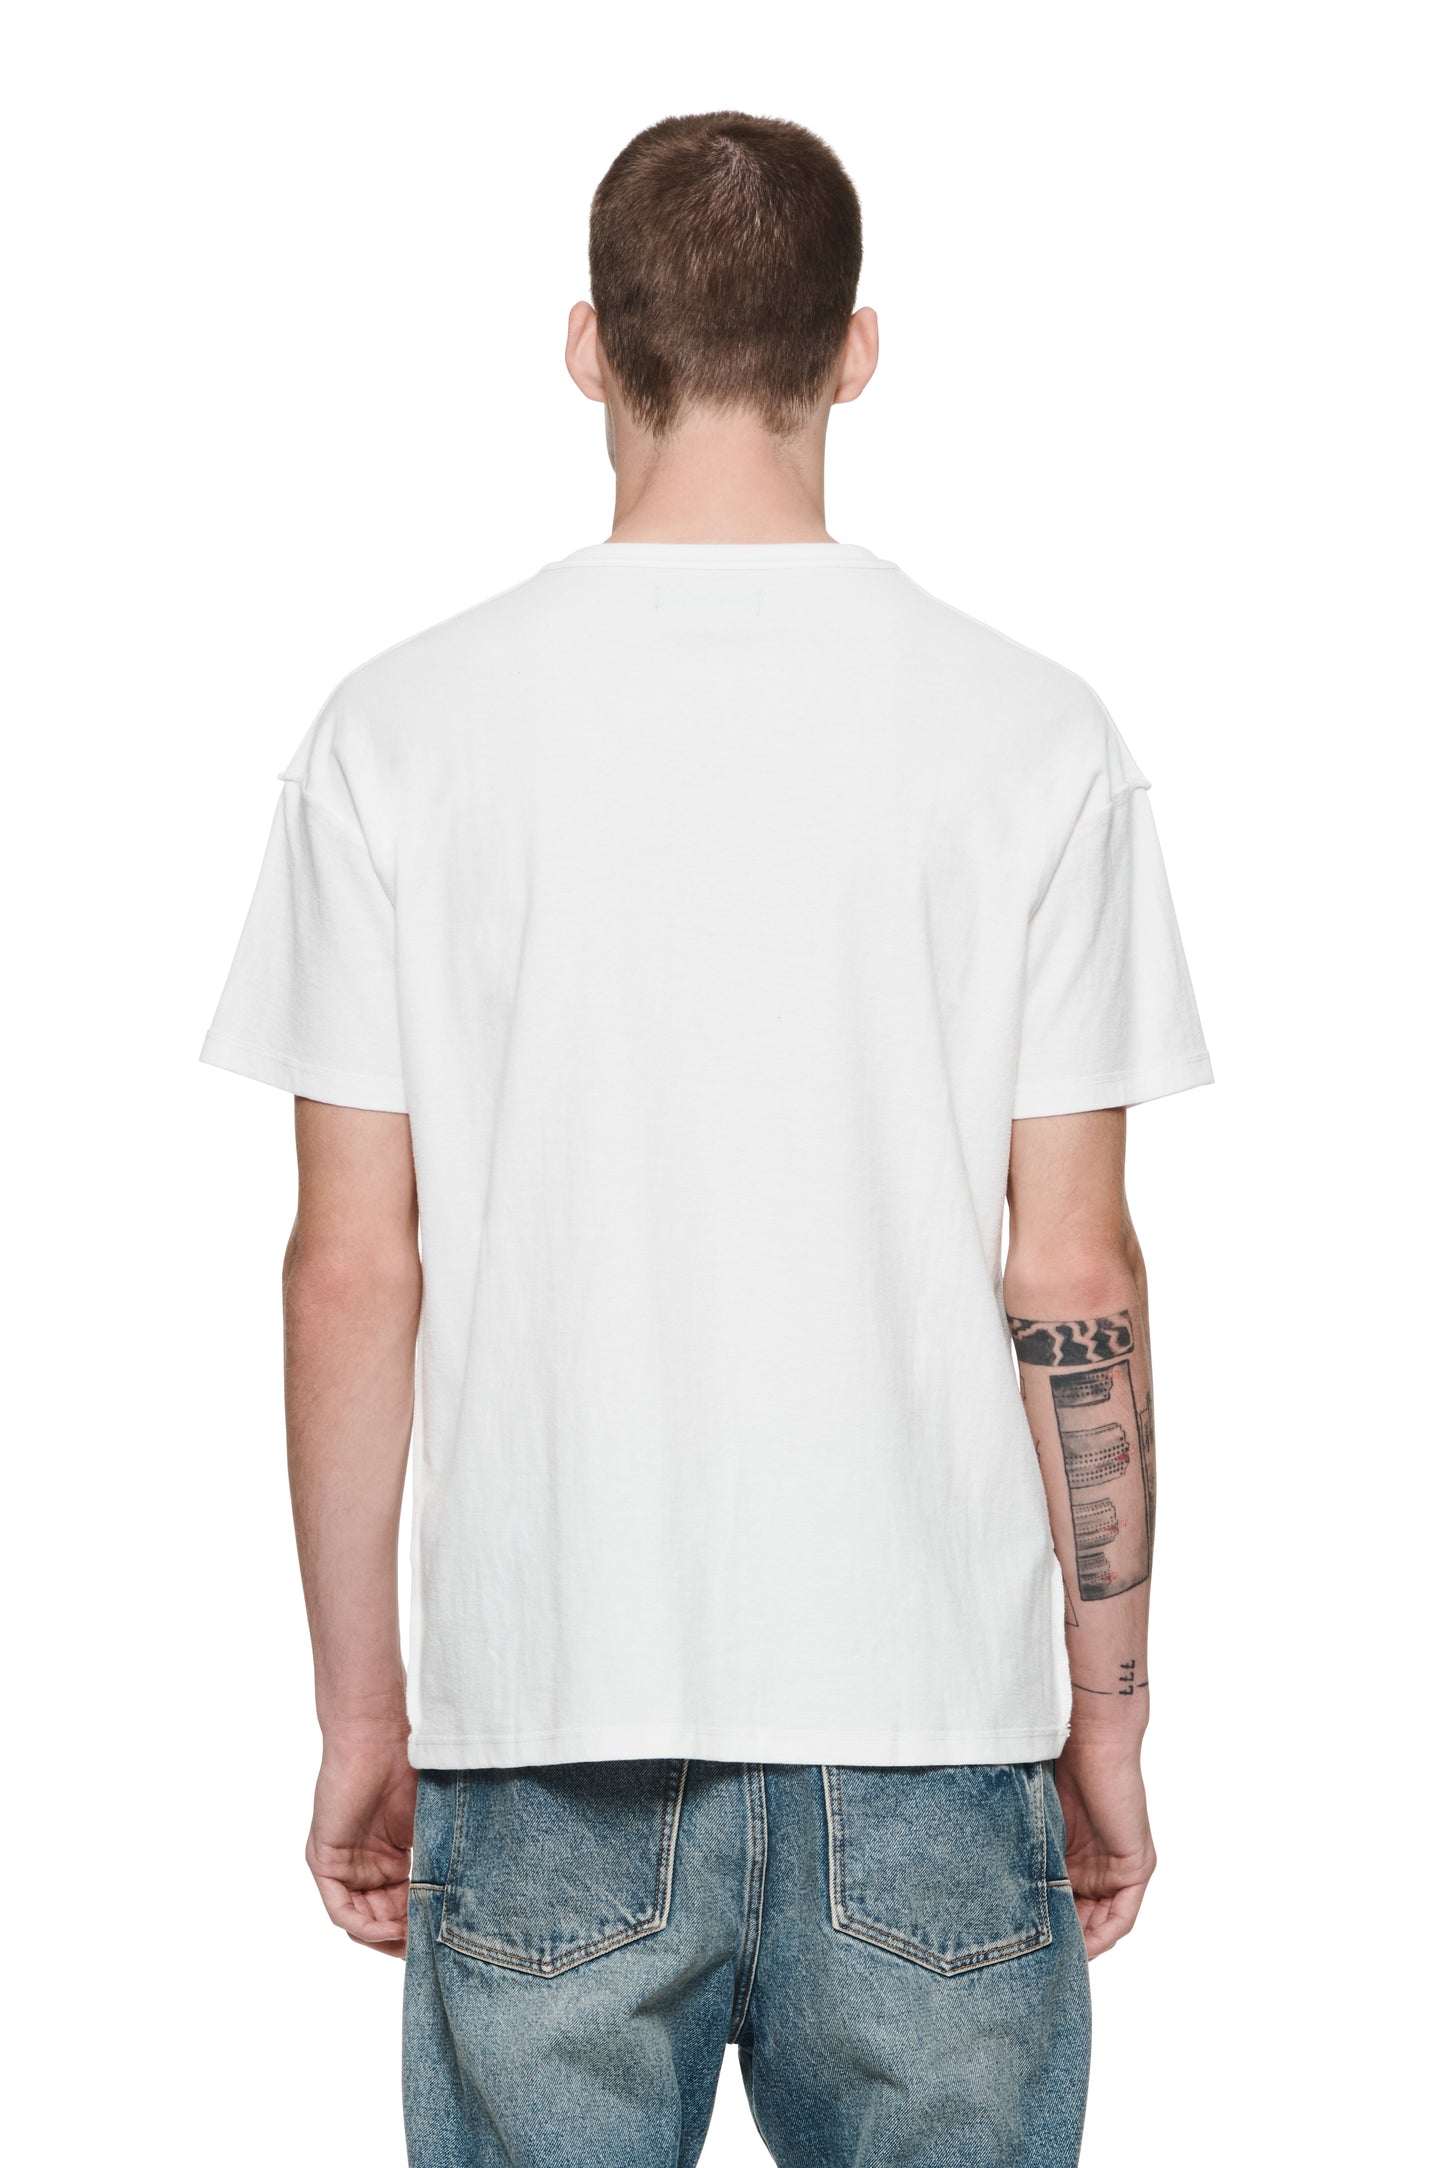 DECAL T-SHIRT - Off White